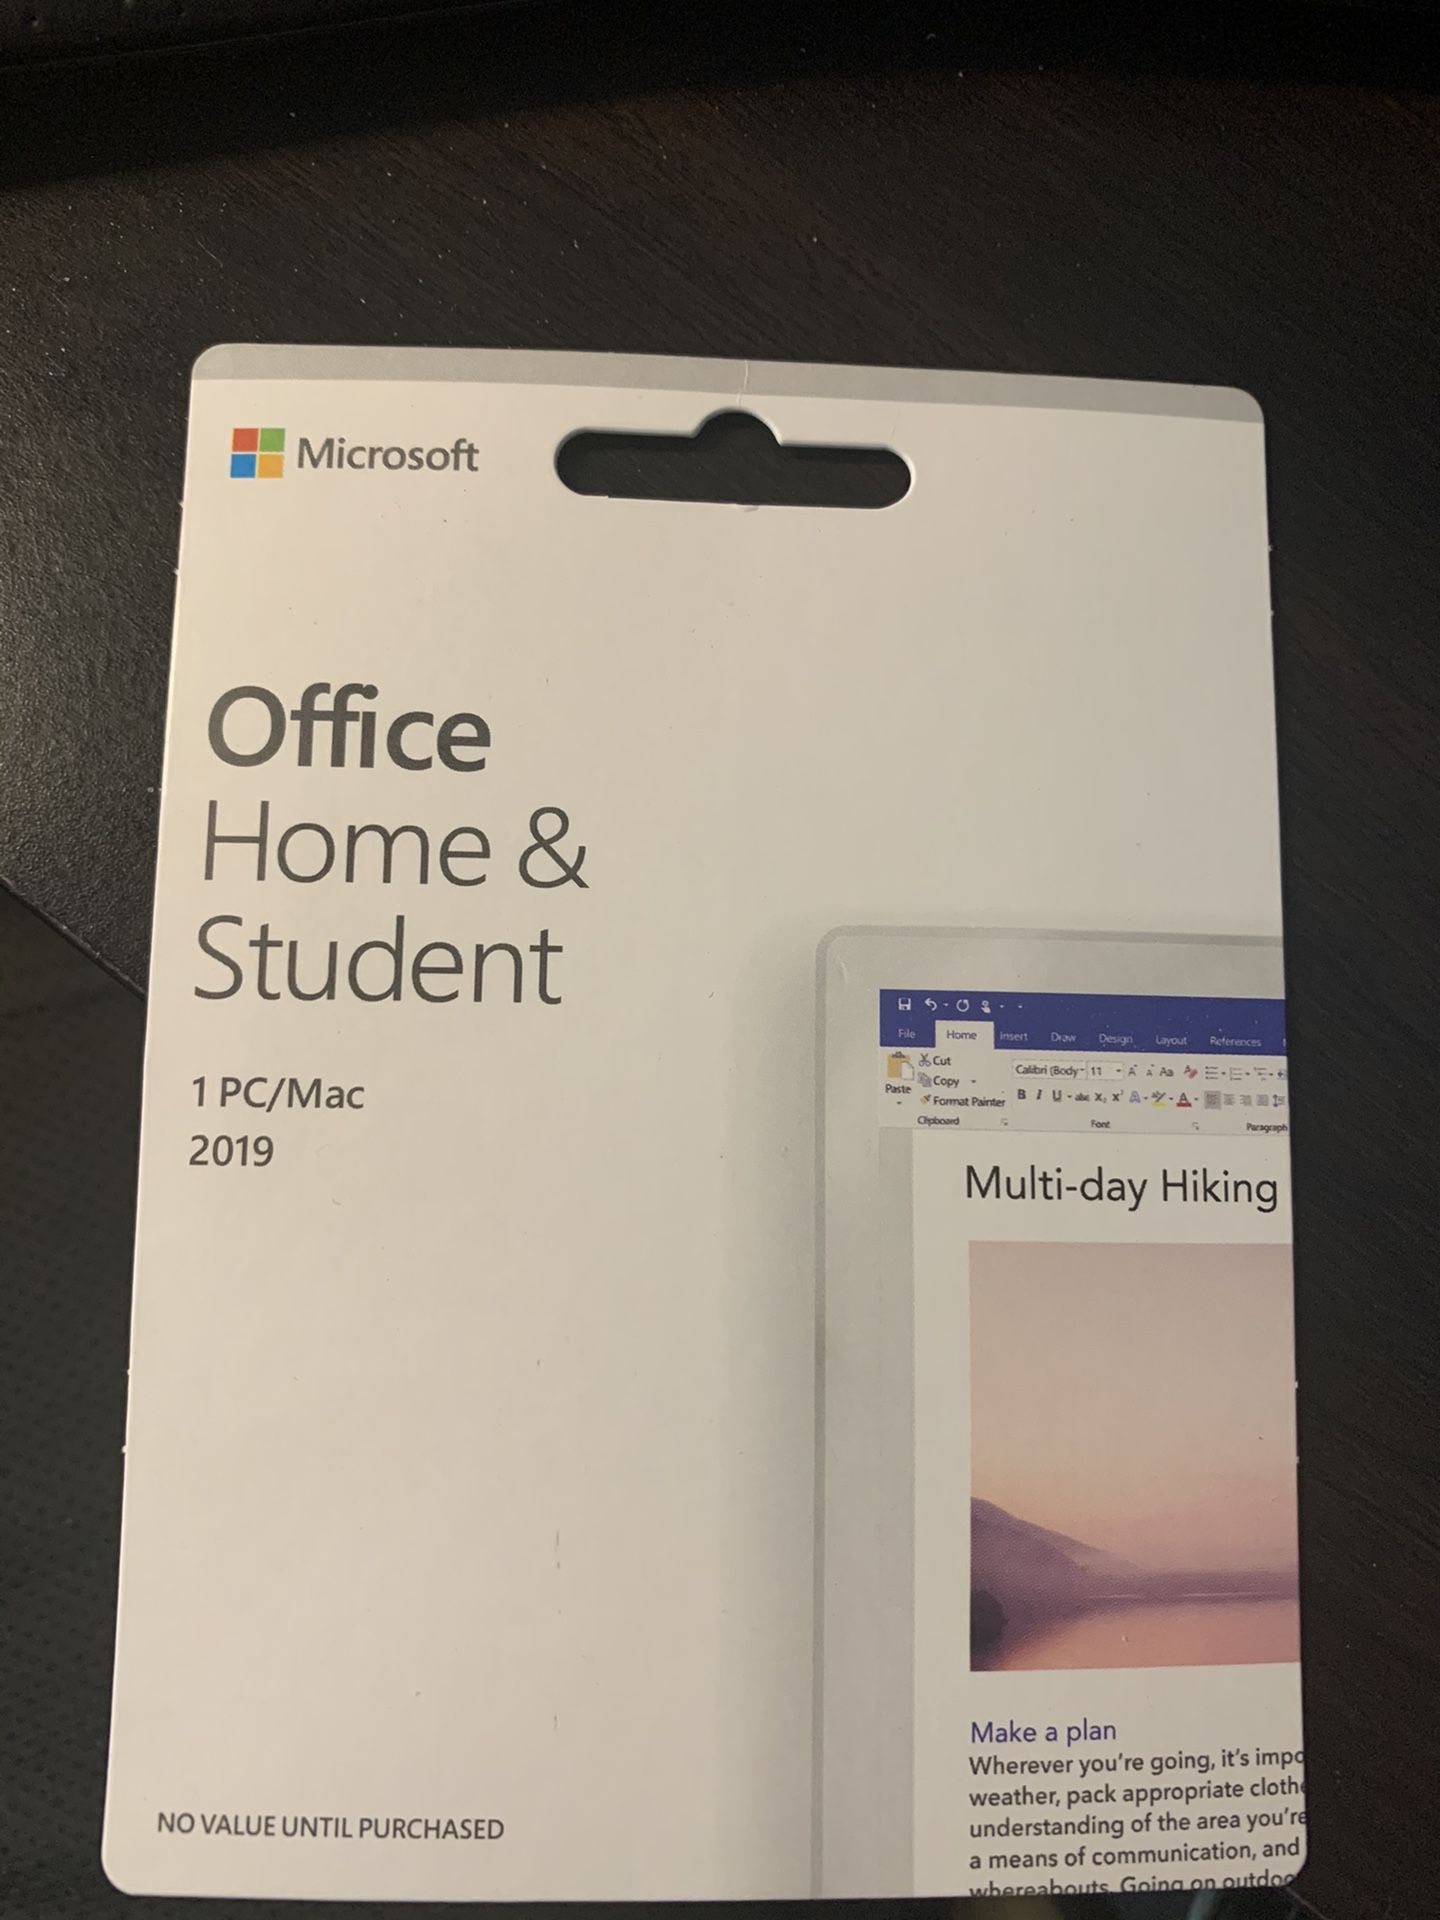 MS Office Home & Student